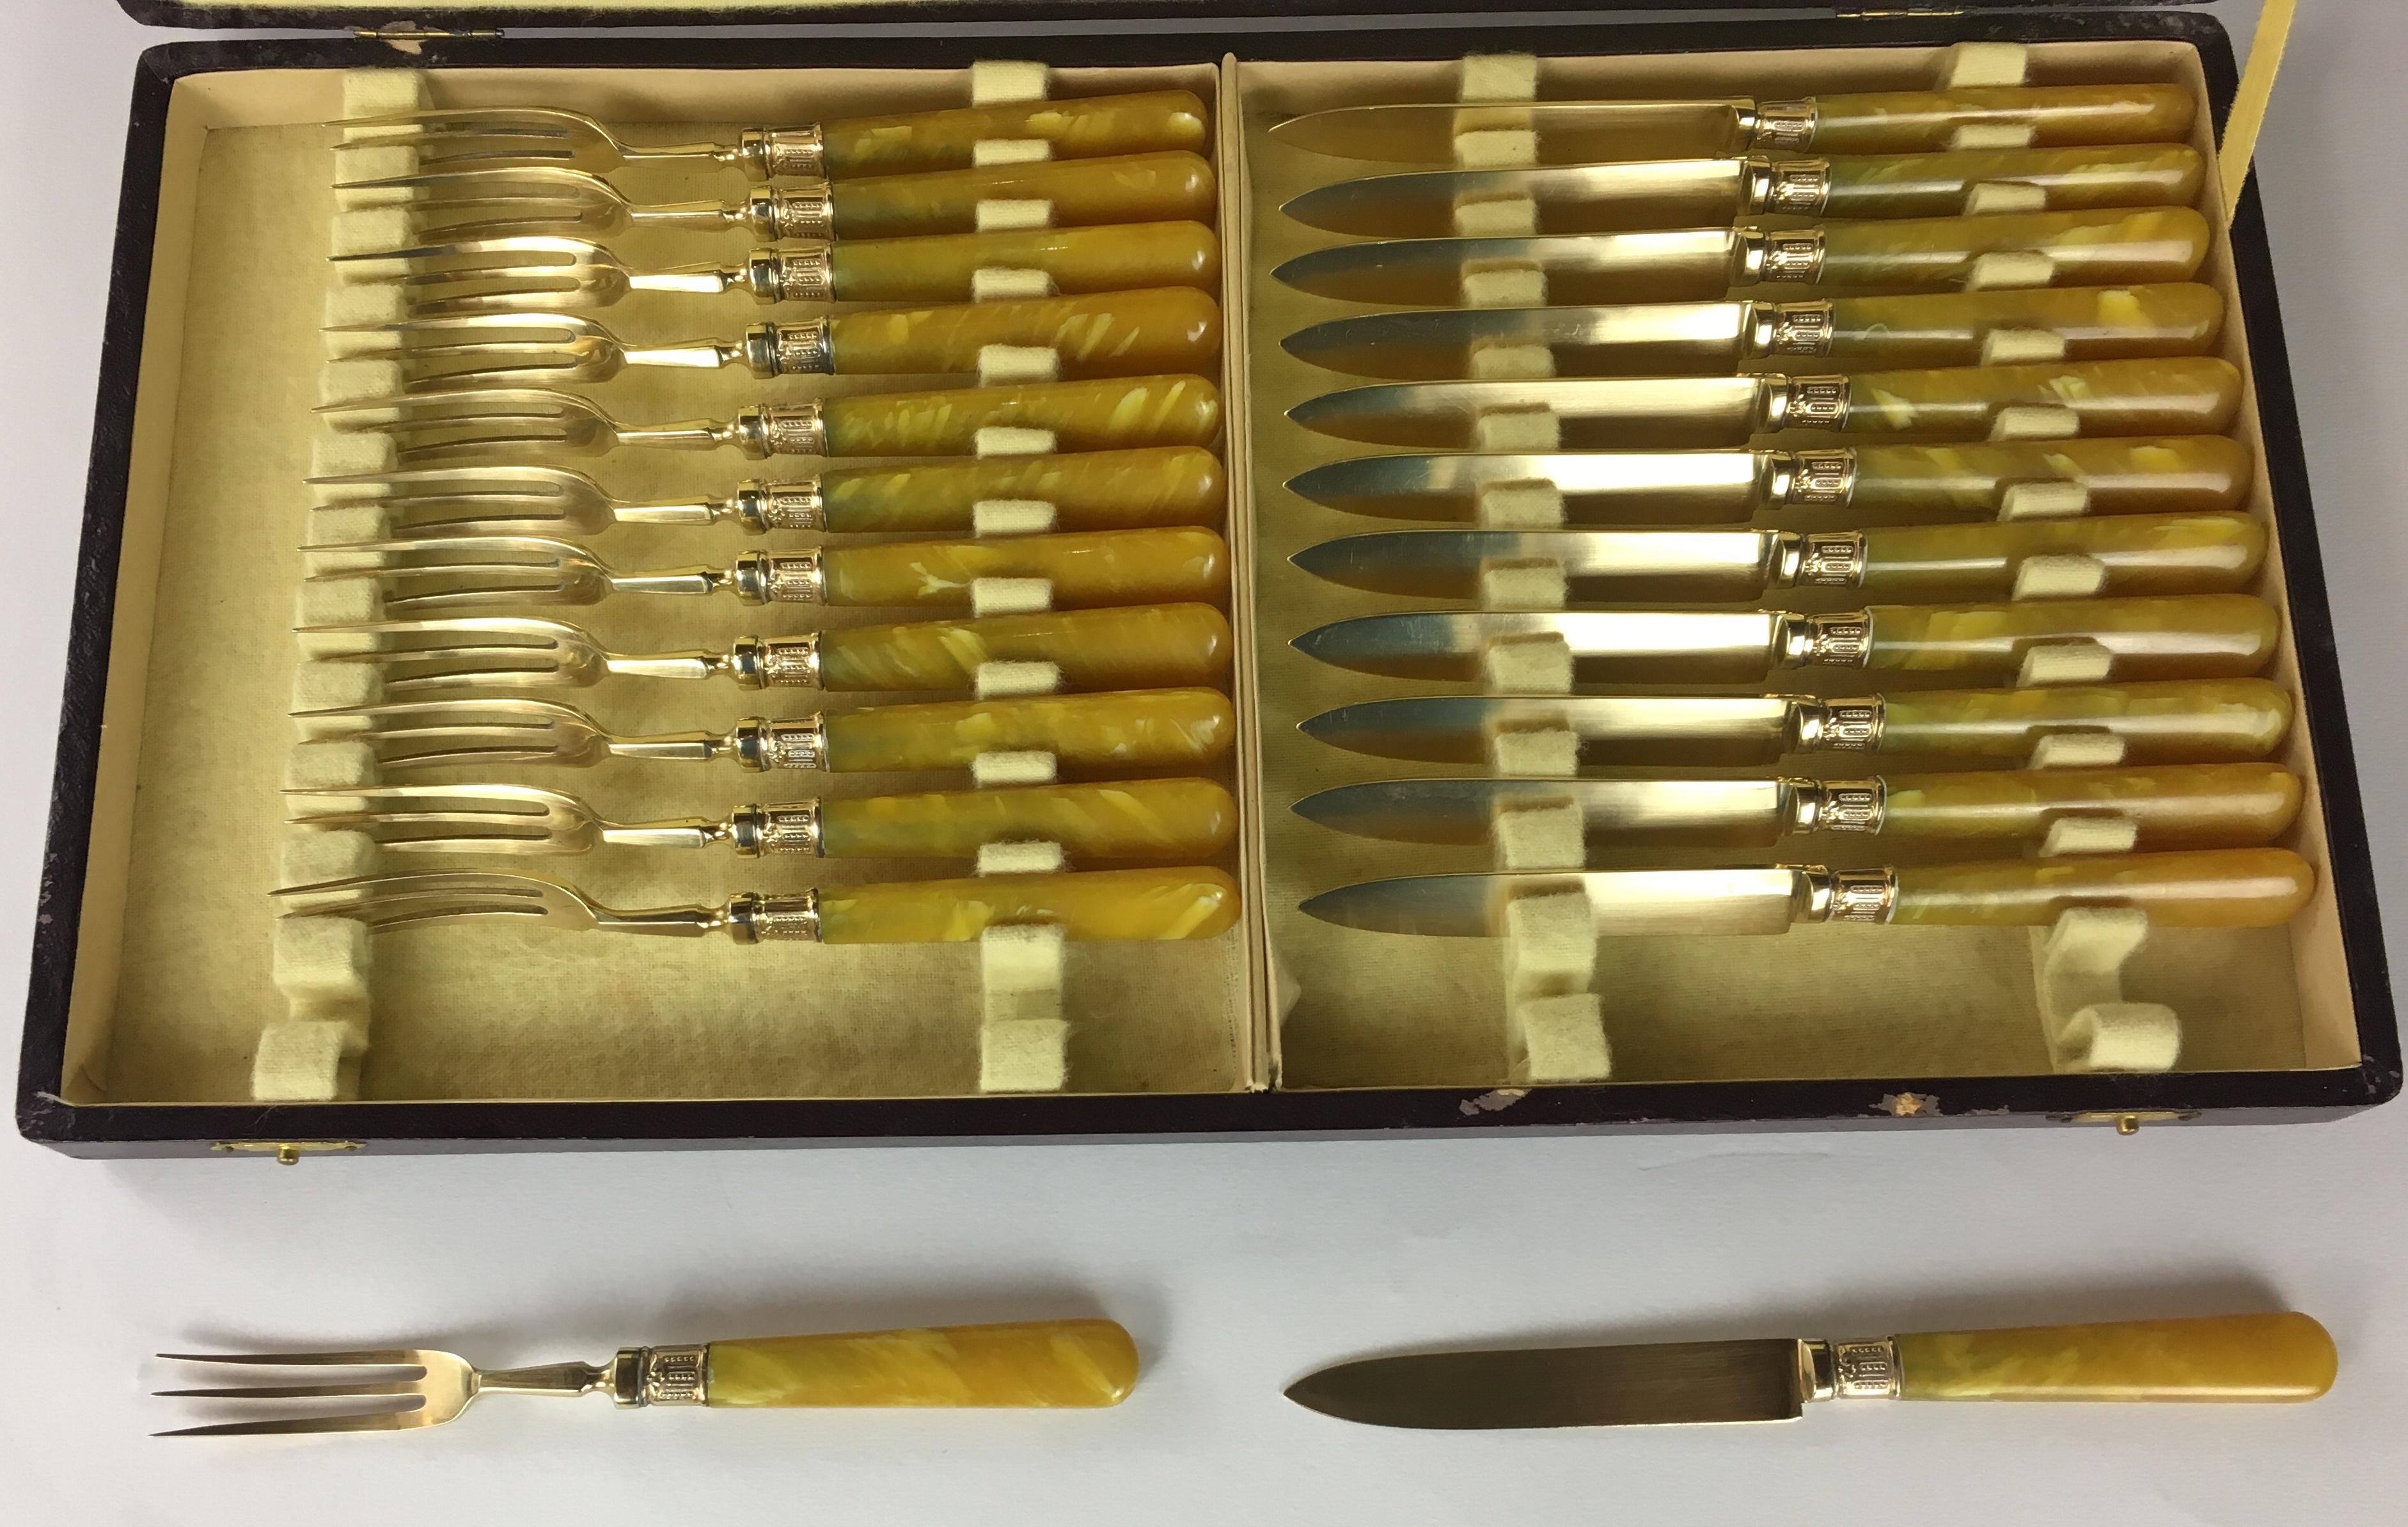 The pricing applies to the entire set of 36 French gold-plated oyster forks set twelve pieces, dessert forks and knives twenty four pieces. All with mother-of-pearl handles and solid gold ferrules. This complete set is sold with their original boxes